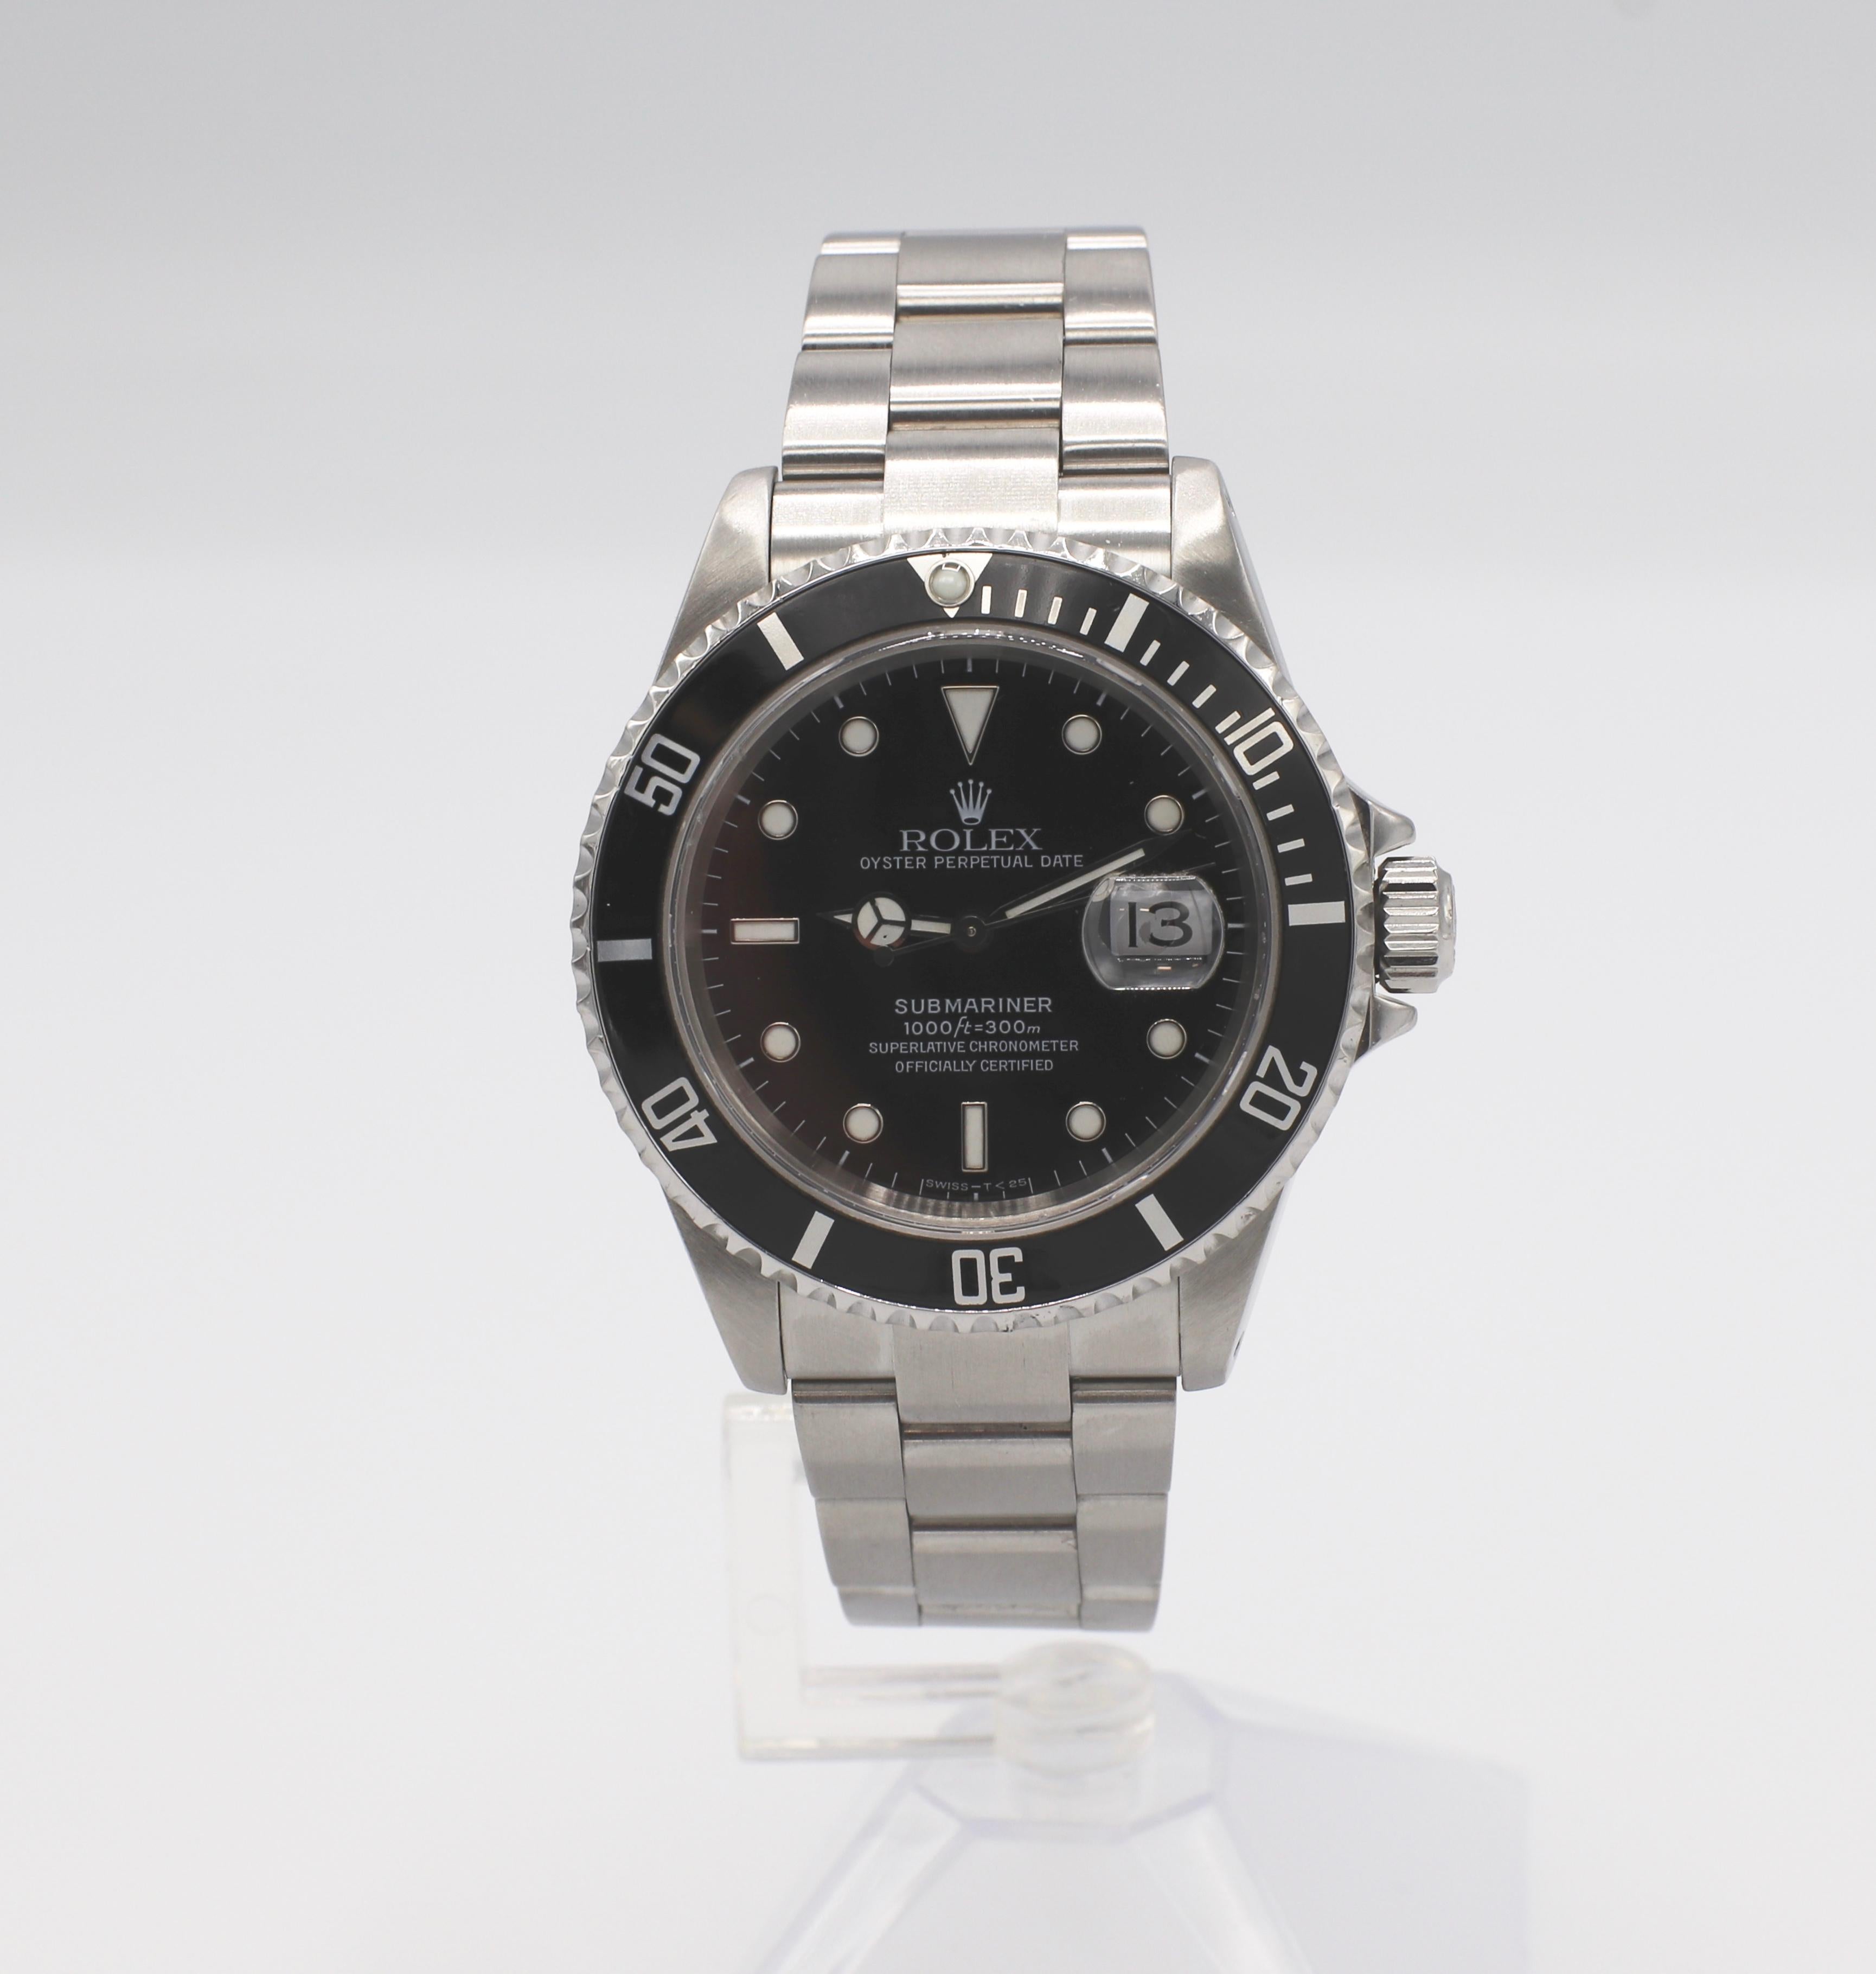 Vintage Rolex Submariner Stainless Steel Reference 16610 1